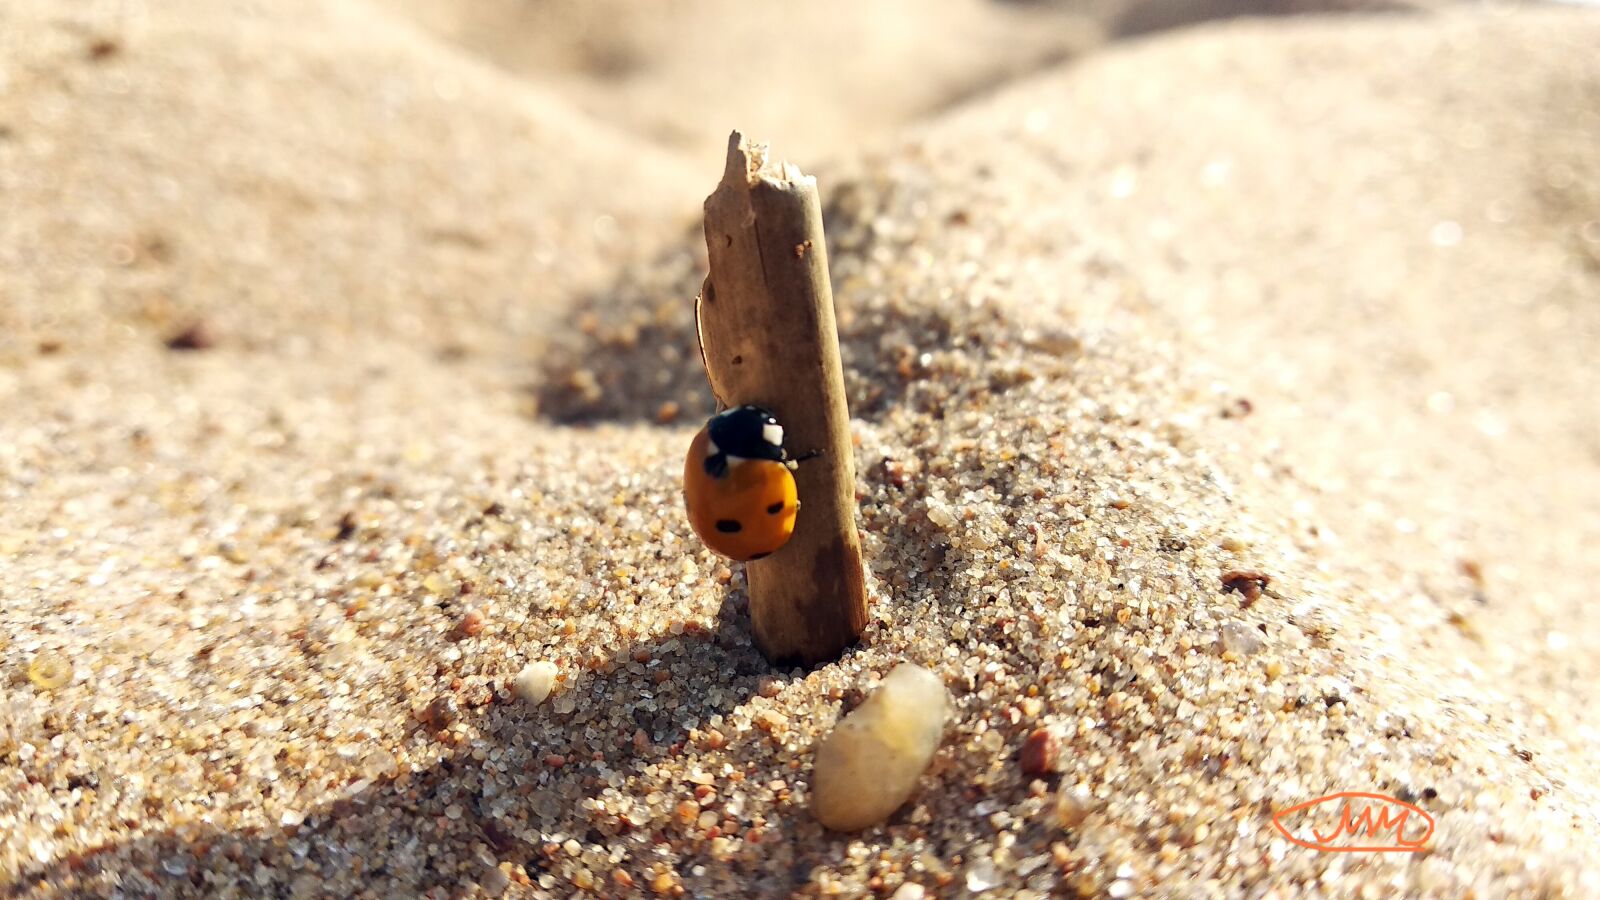 Xiaomi Redmi 5 Plus sample photo. God's cow, insect, beach photography